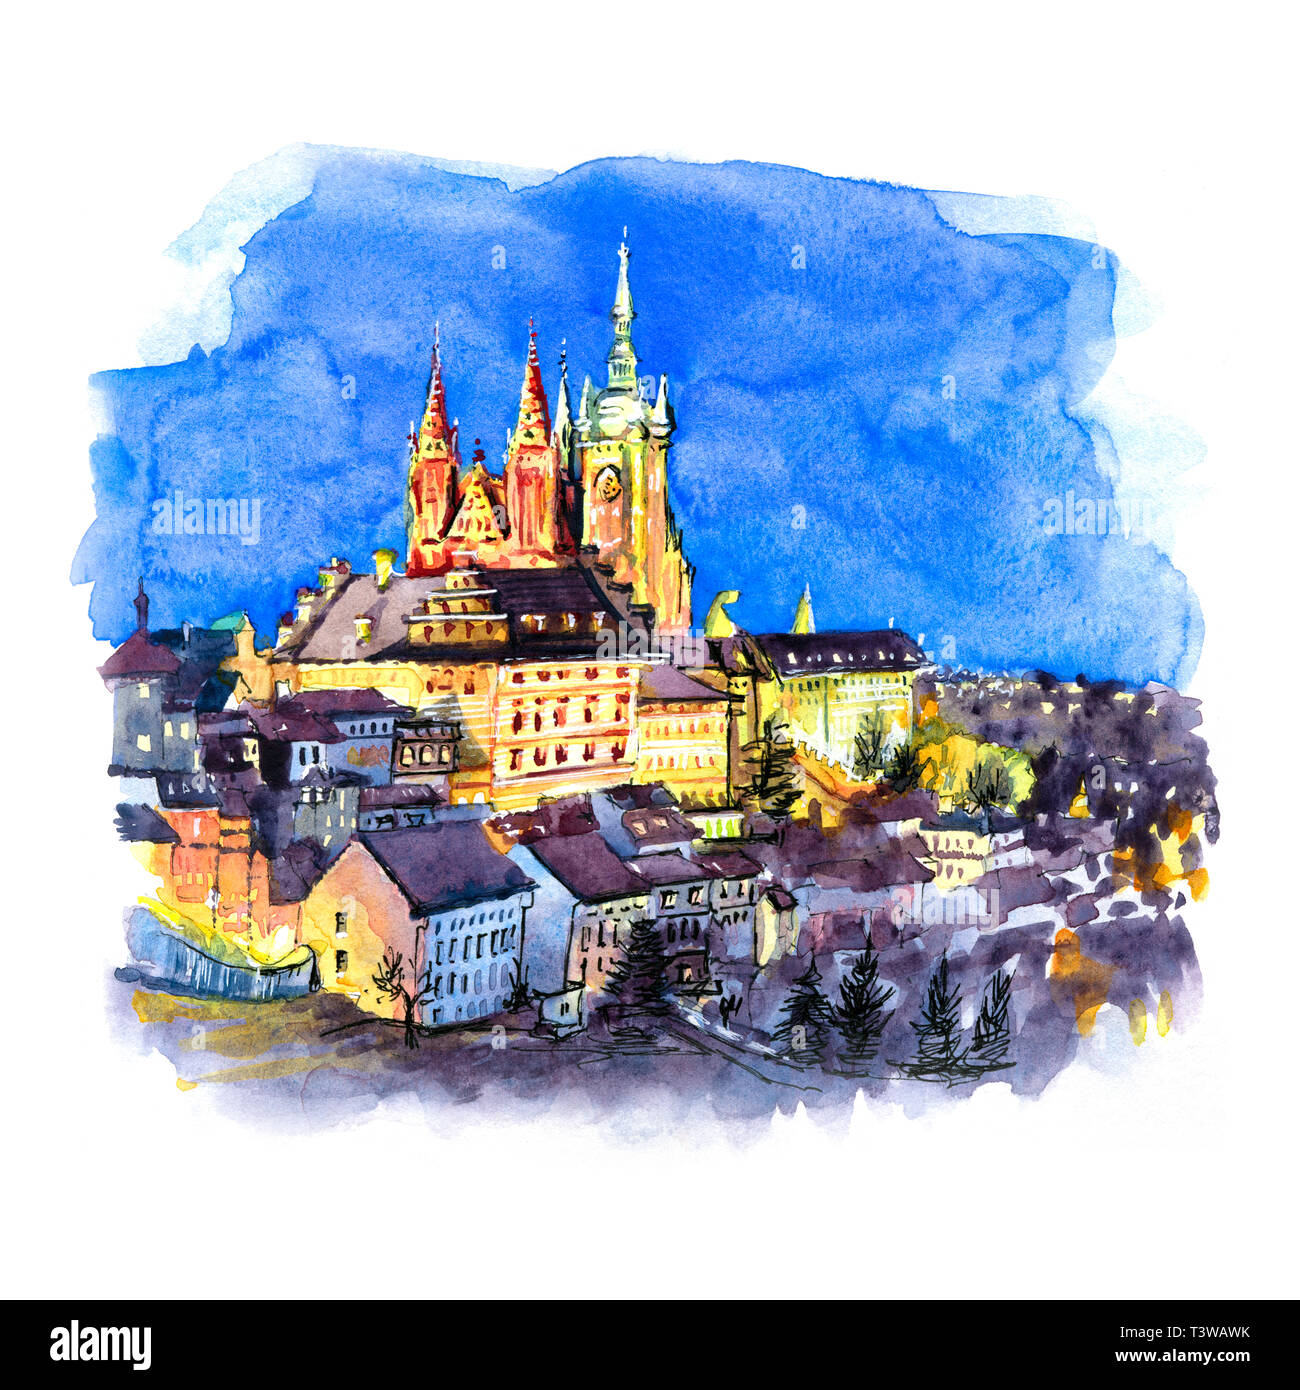 Watercolor sketch of Prague Castle, Hradcany and Little Quarter in old town at night of Prague, Czech Republic Stock Photo